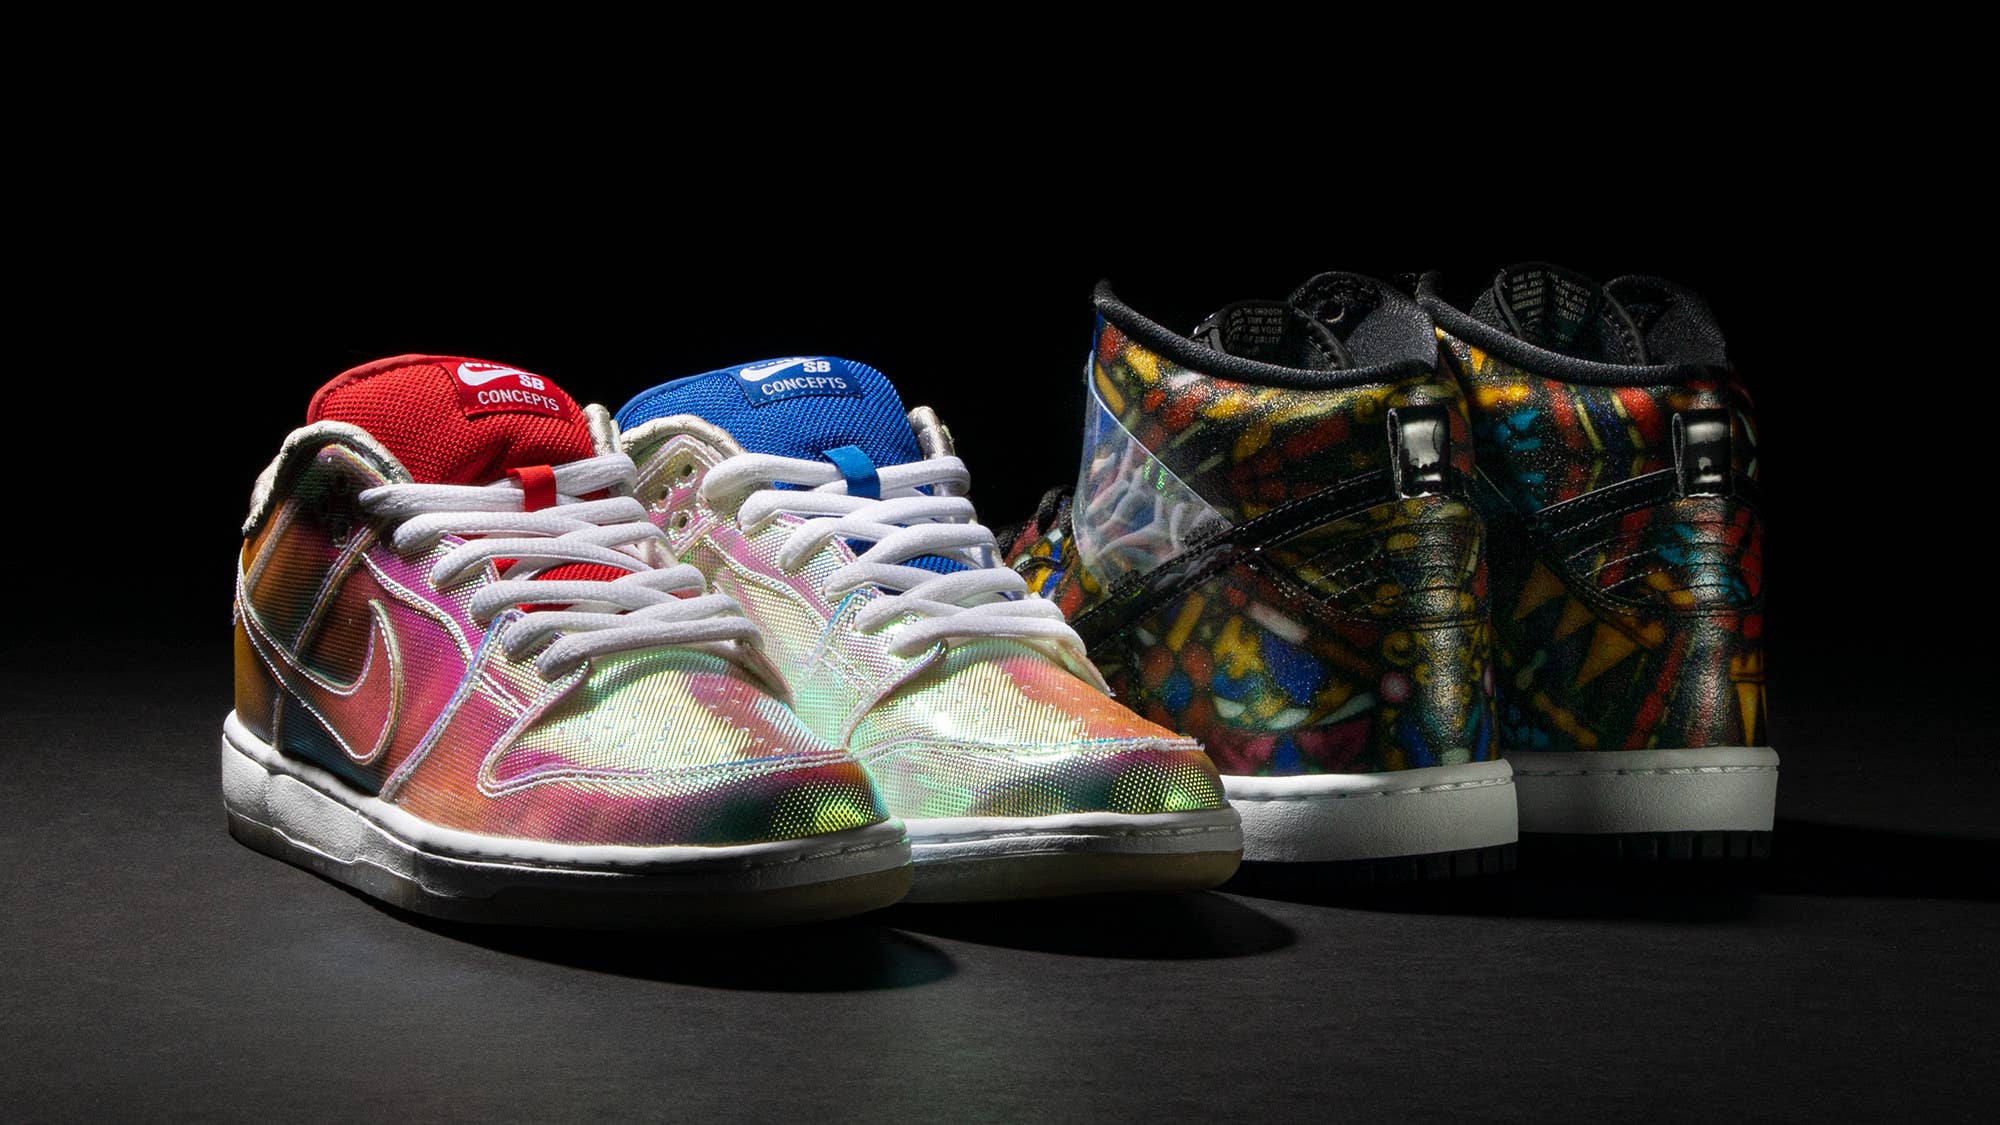 Concepts x Nike SB Dunk High 'Stained Glass' and SB Dunk Low 'Holy Grail'